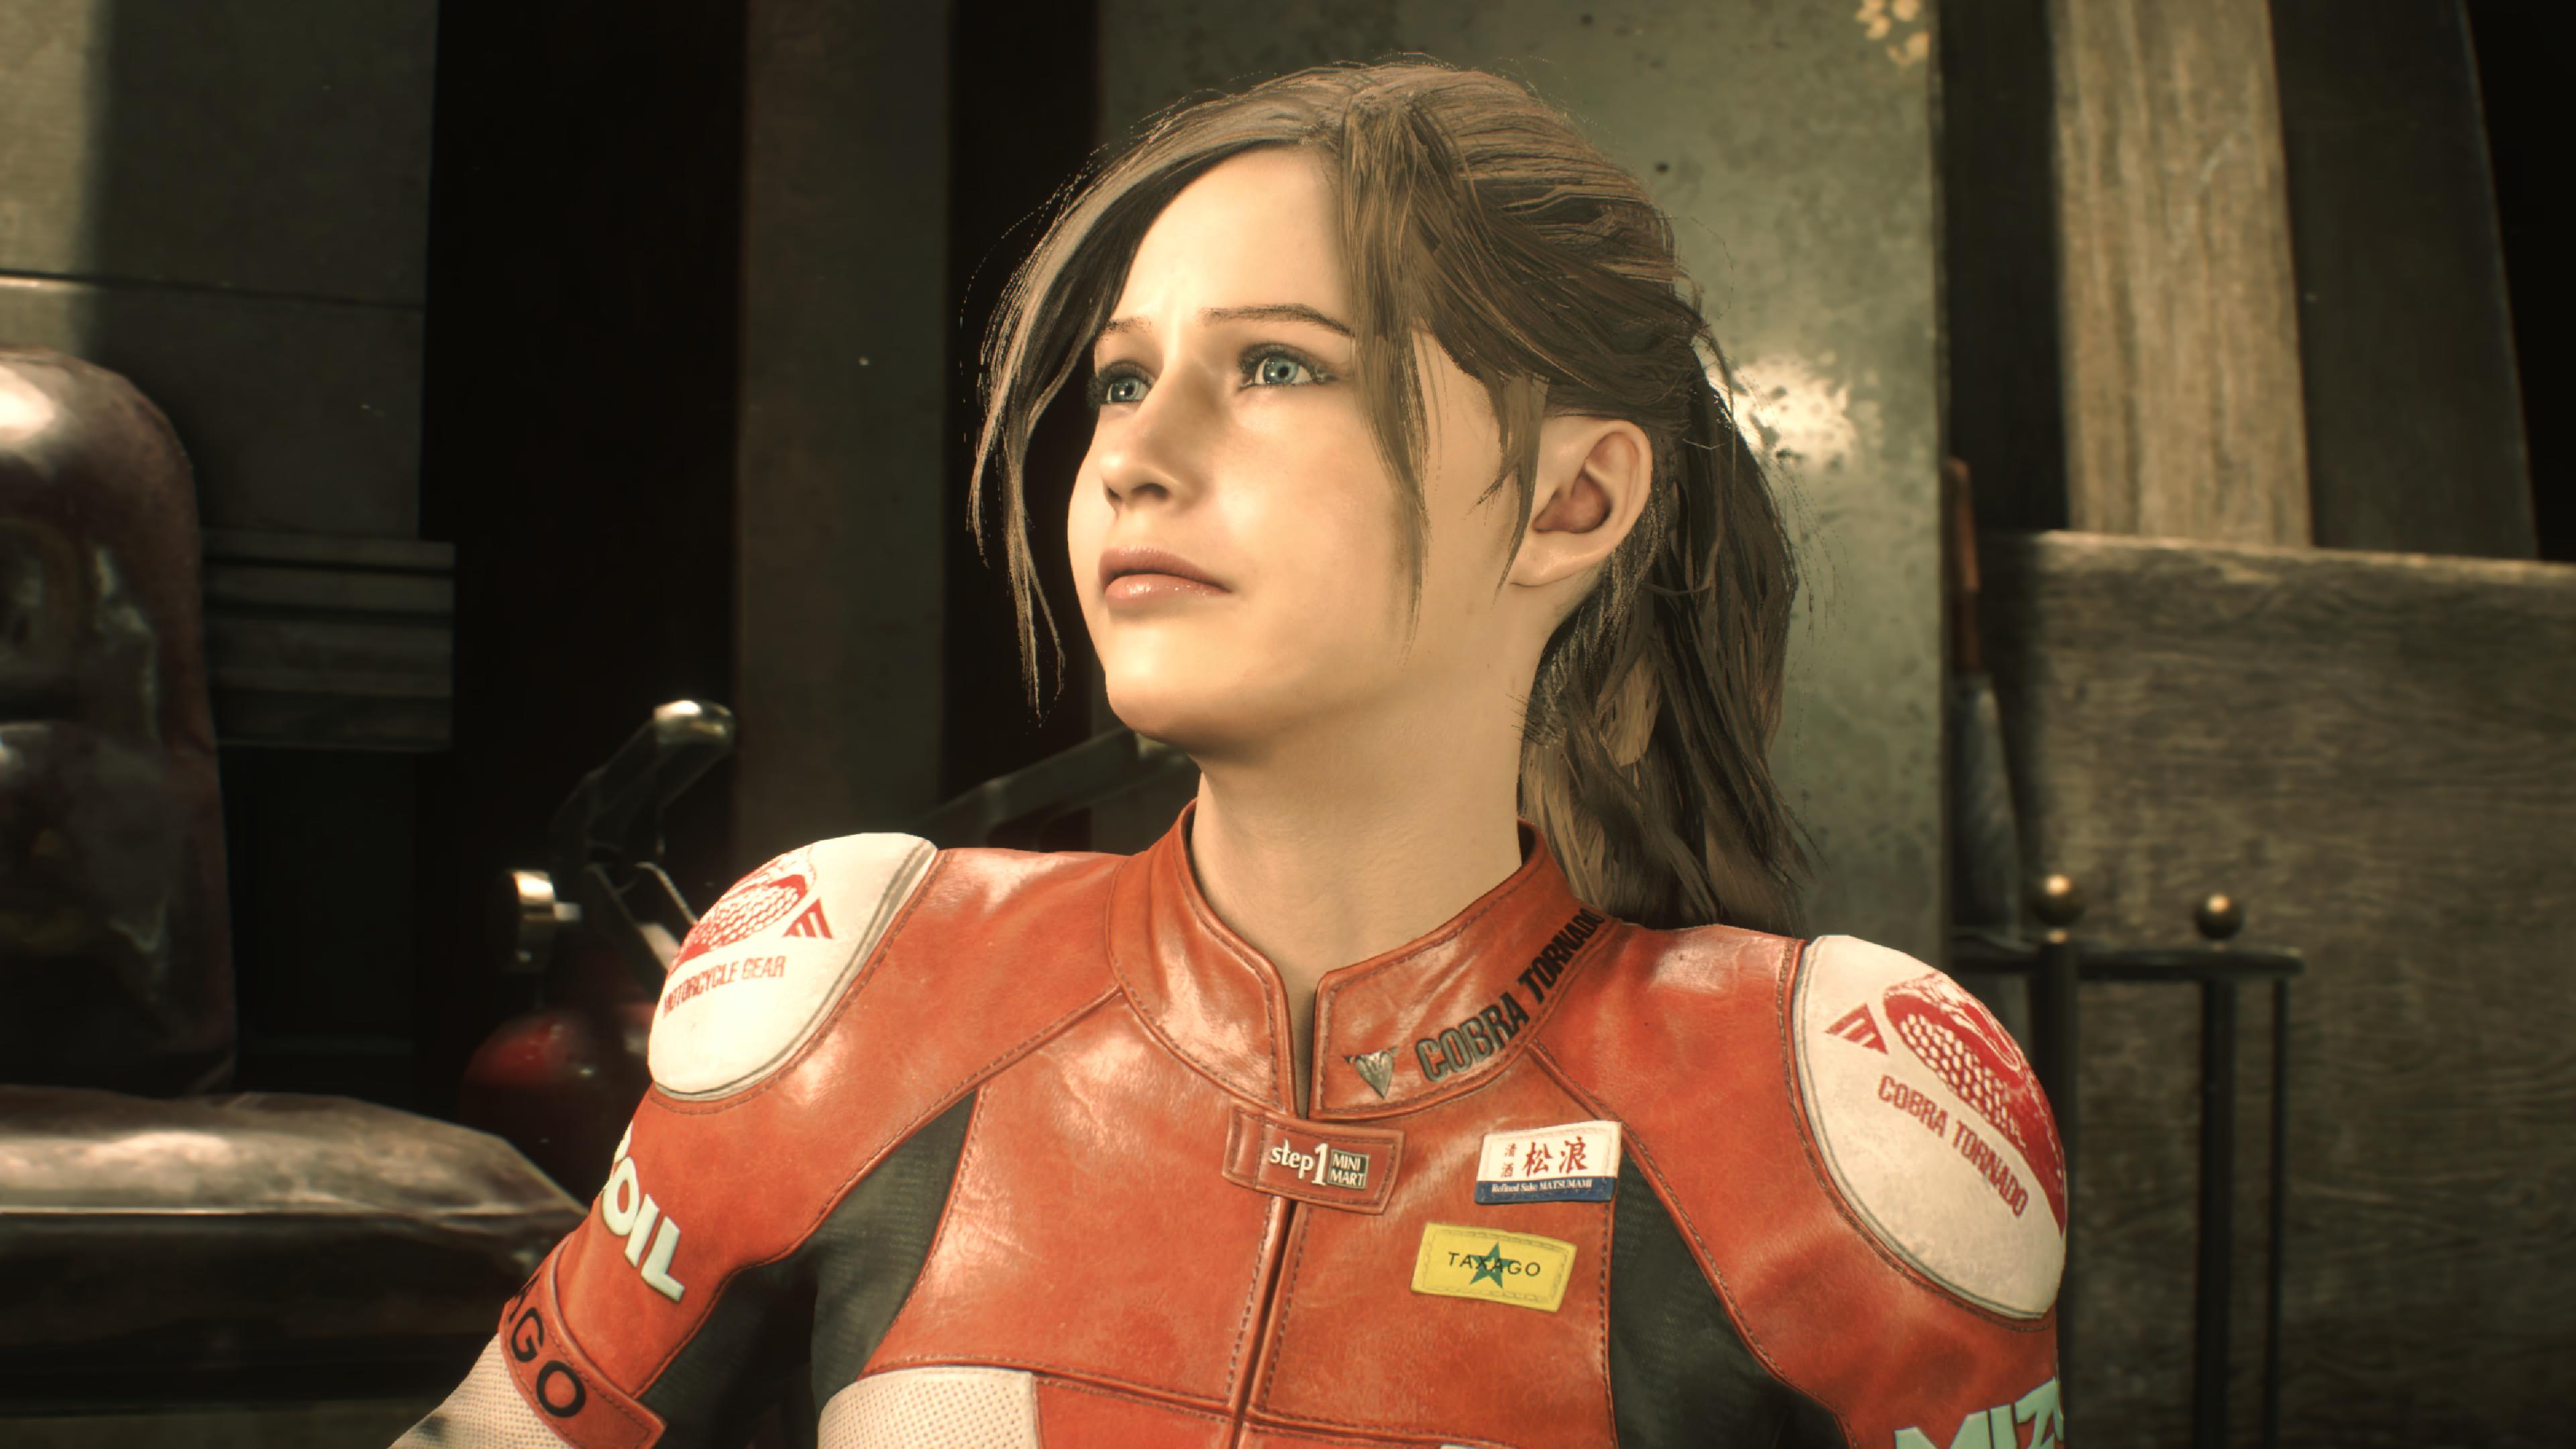 Dale_Res on X: Claire Redfield - Resident Evil 2 (Original - Remake)  #REBHFun #ClaireRedfield #ResidentEvil #RE2  / X